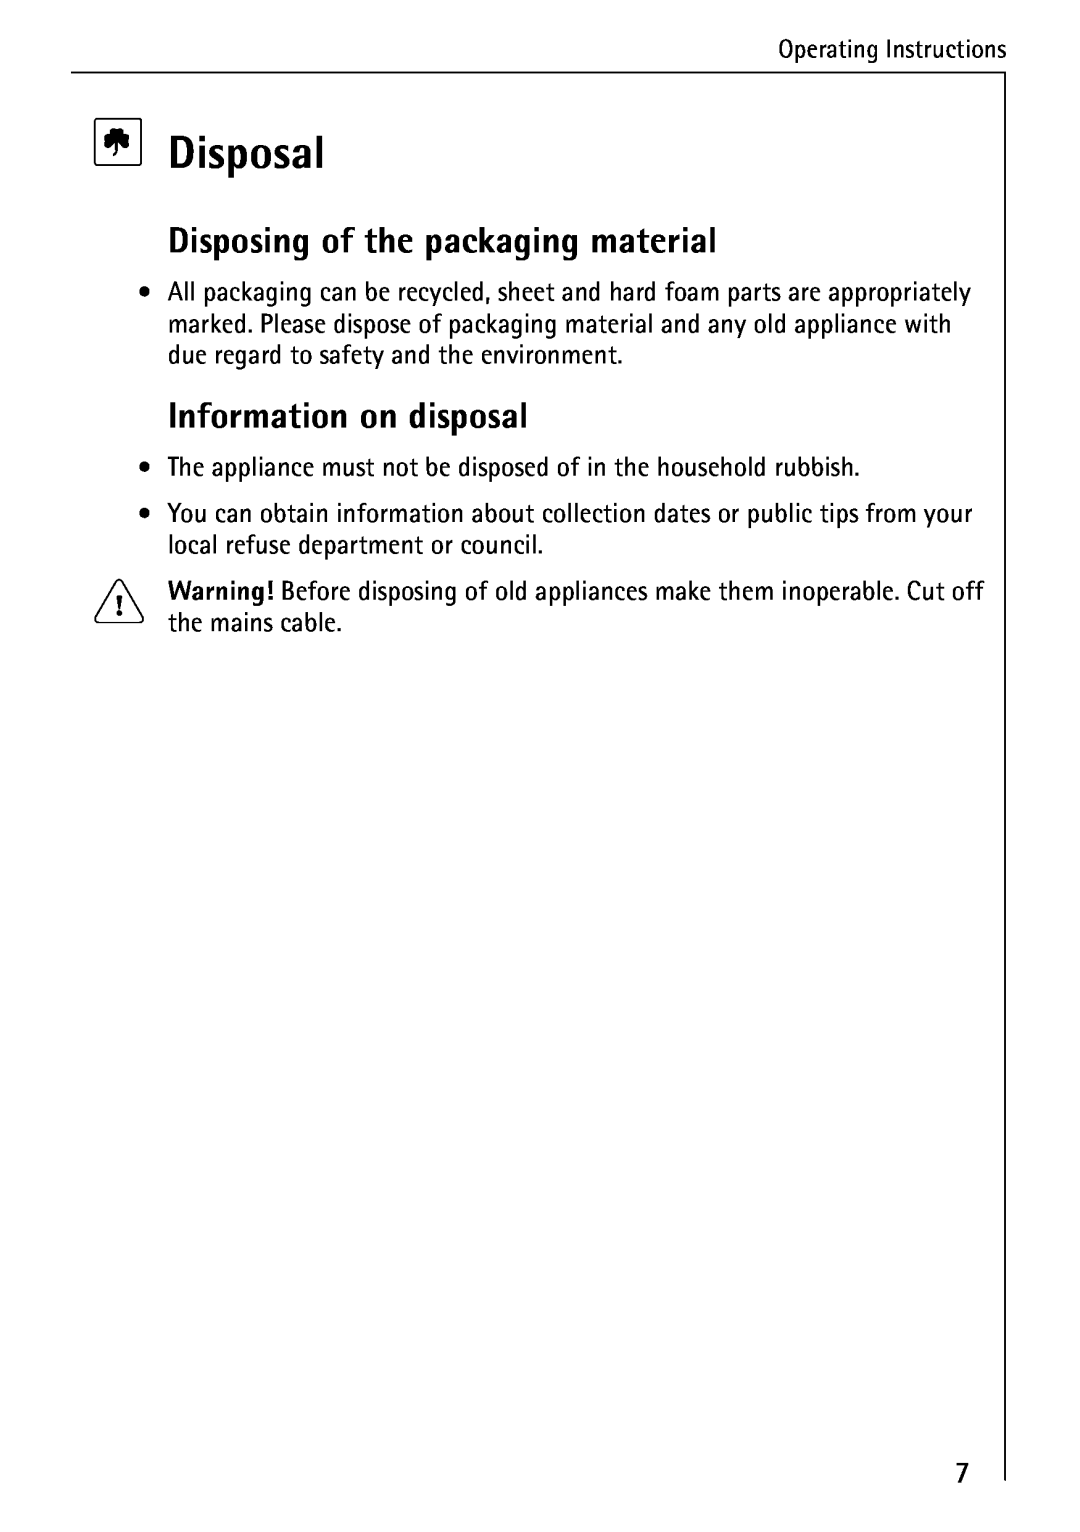 Electrolux 65300KF-an operating instructions Disposal, Disposing of the packaging material, Information on disposal 